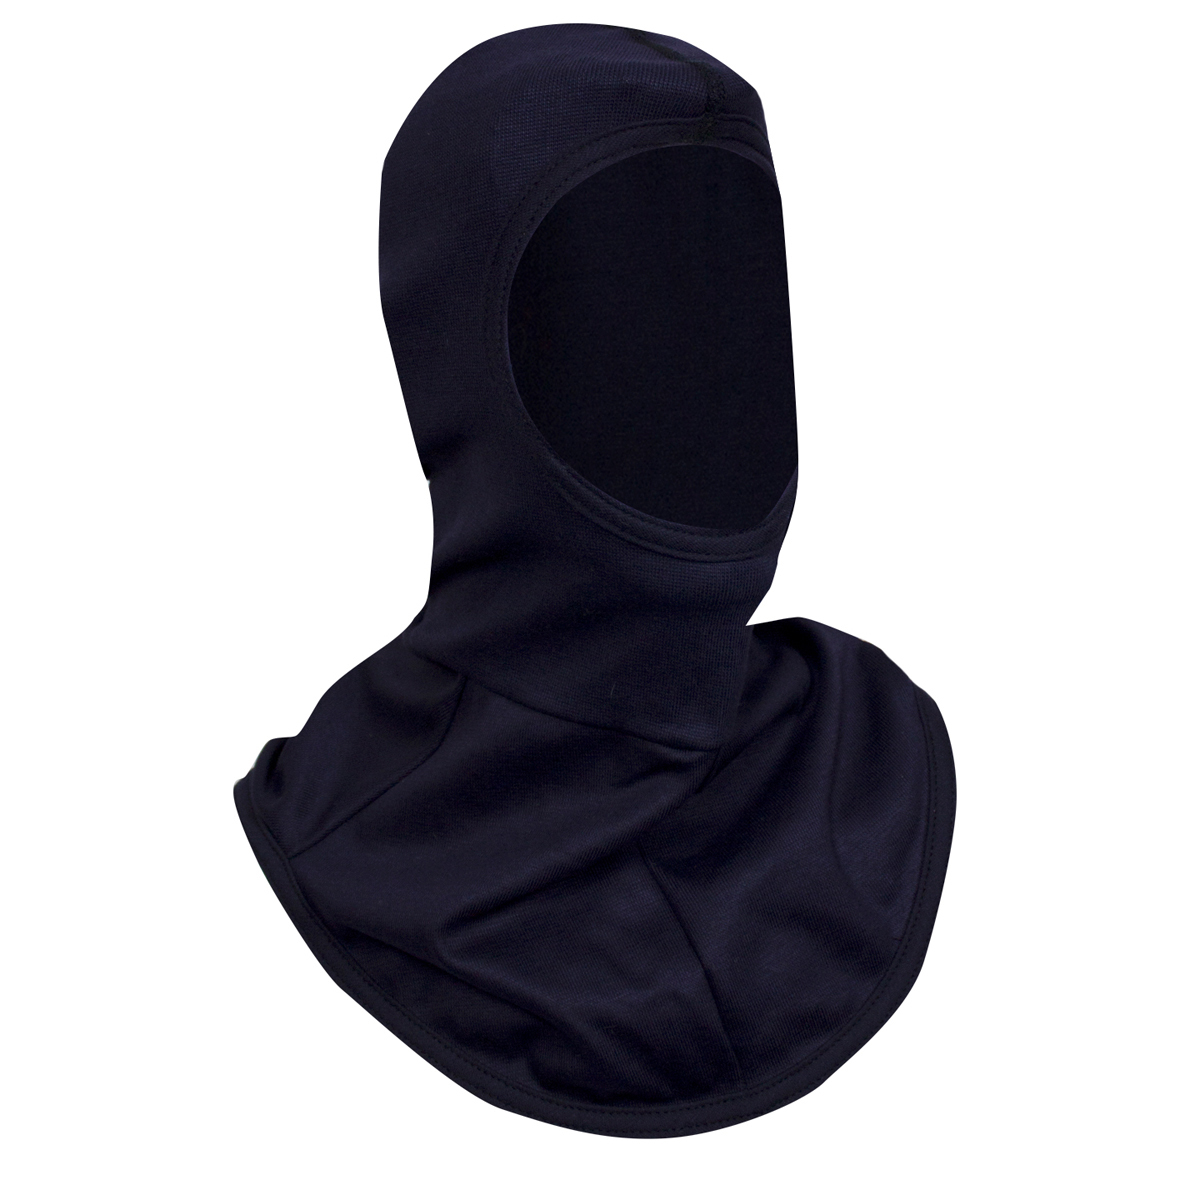 National Safety Apparel Navy Westex UltraSoft® Rib Heavy Weight Flame Resistant Balaclava